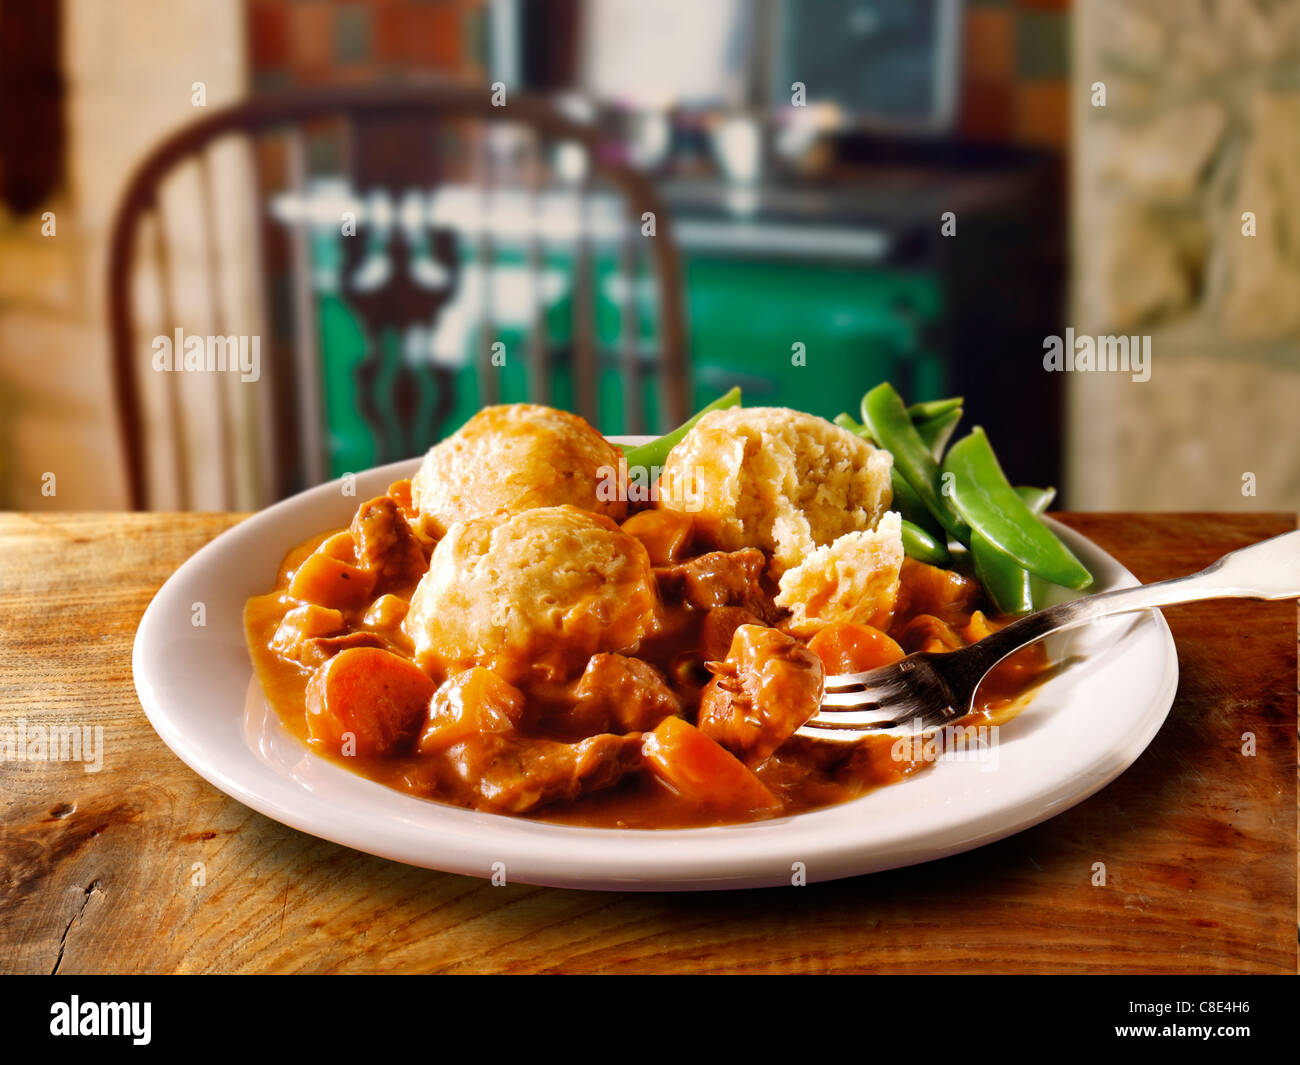 Traditional British cooked Beef Stew nd Dumplins on a white plate in a traditional kitchen setting ready to eat Stock Photo